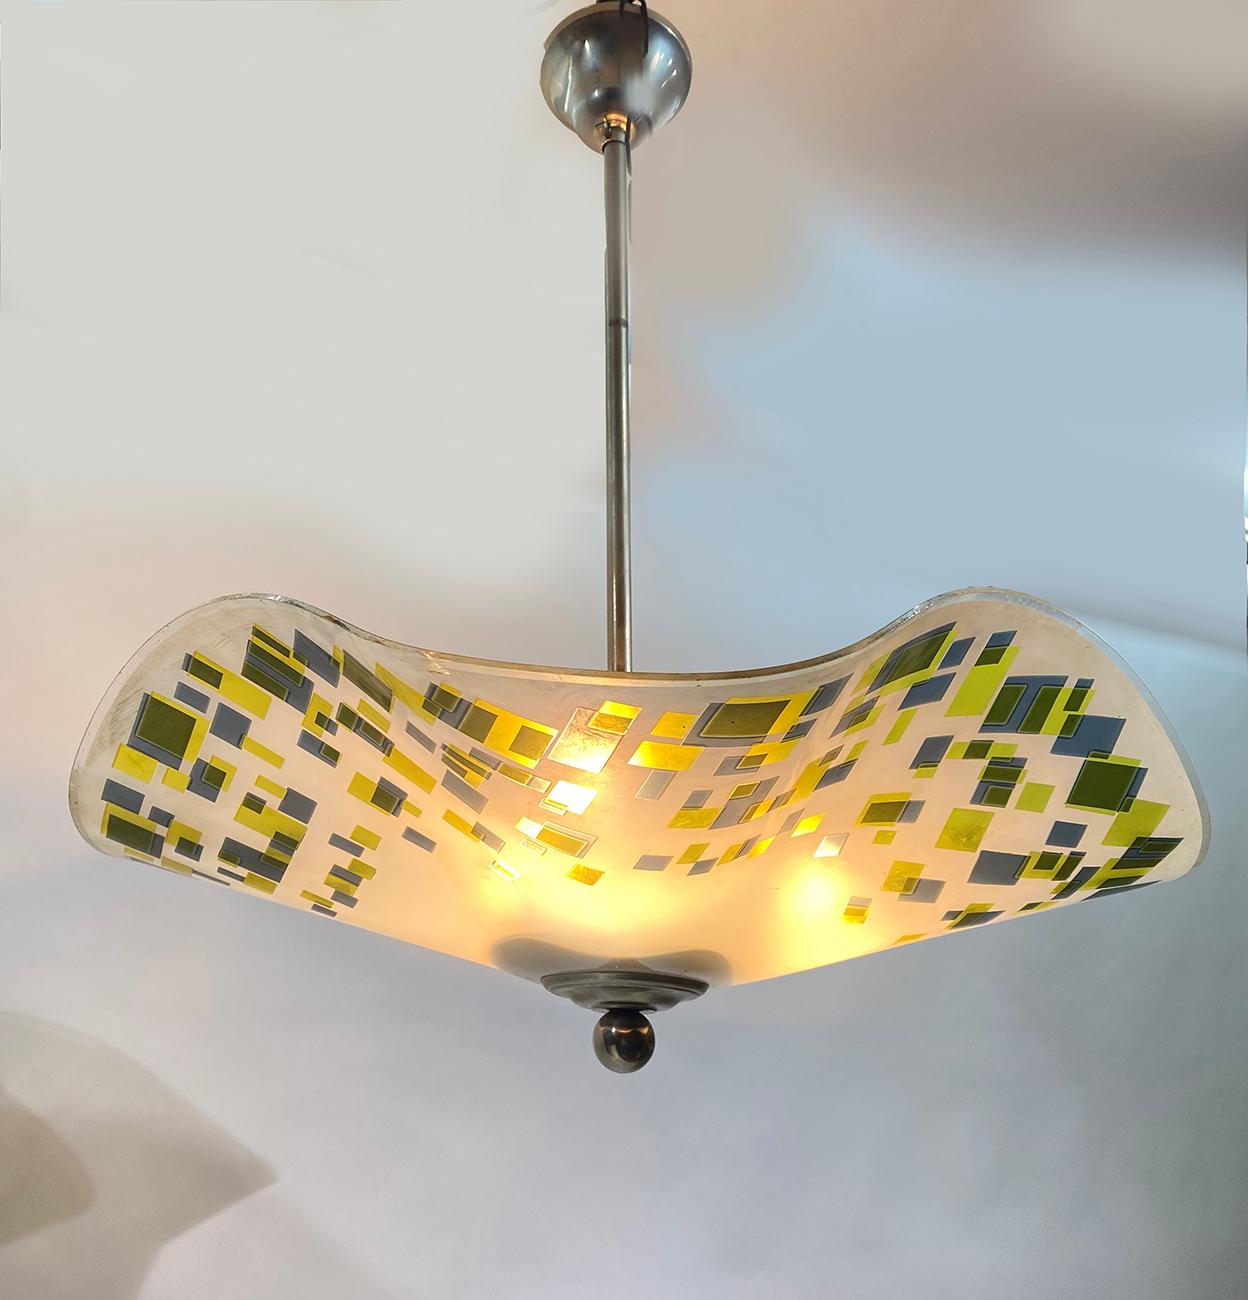 Large mid century French Art Deco pendant chandelier, circa 1930s.
Colorful lampshade hung on its nickel-plated fixture.
Delivered and wired for American or European use.
Slight damage on the border of glass without fracture. 